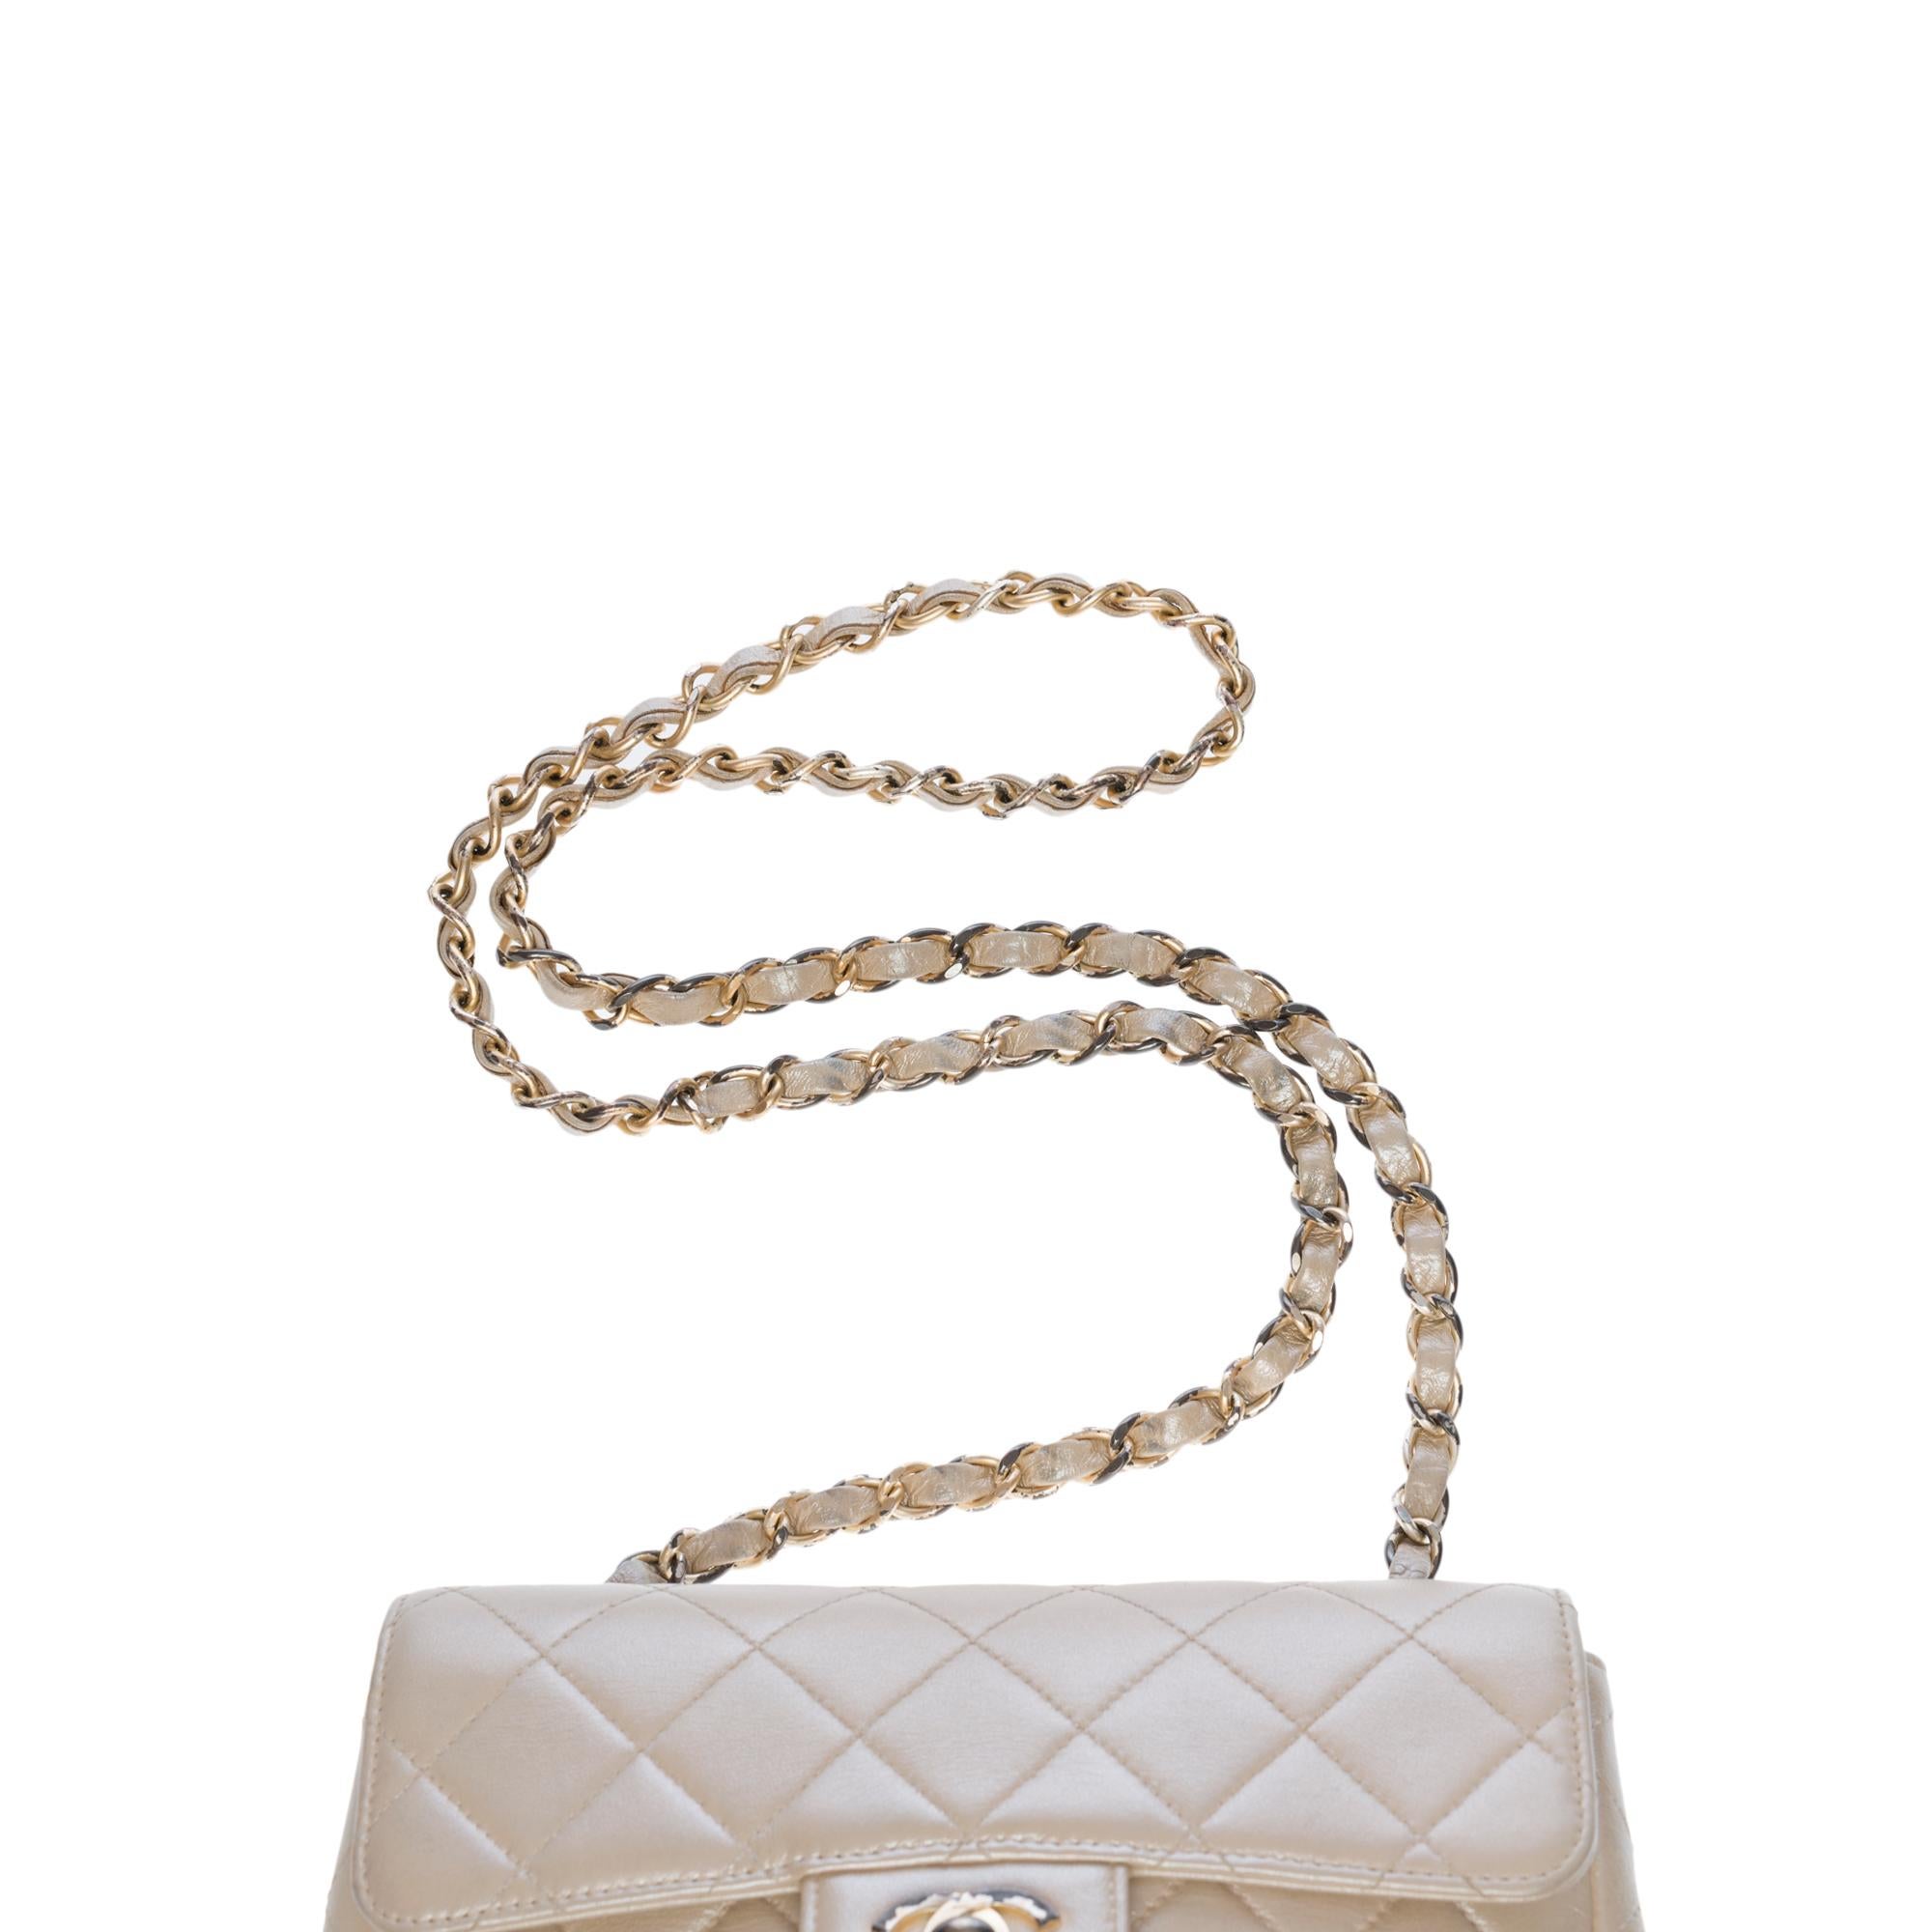 Chanel Mini Timeless flap shoulder bag in metallic mother-of-pearl leather, GHW 3